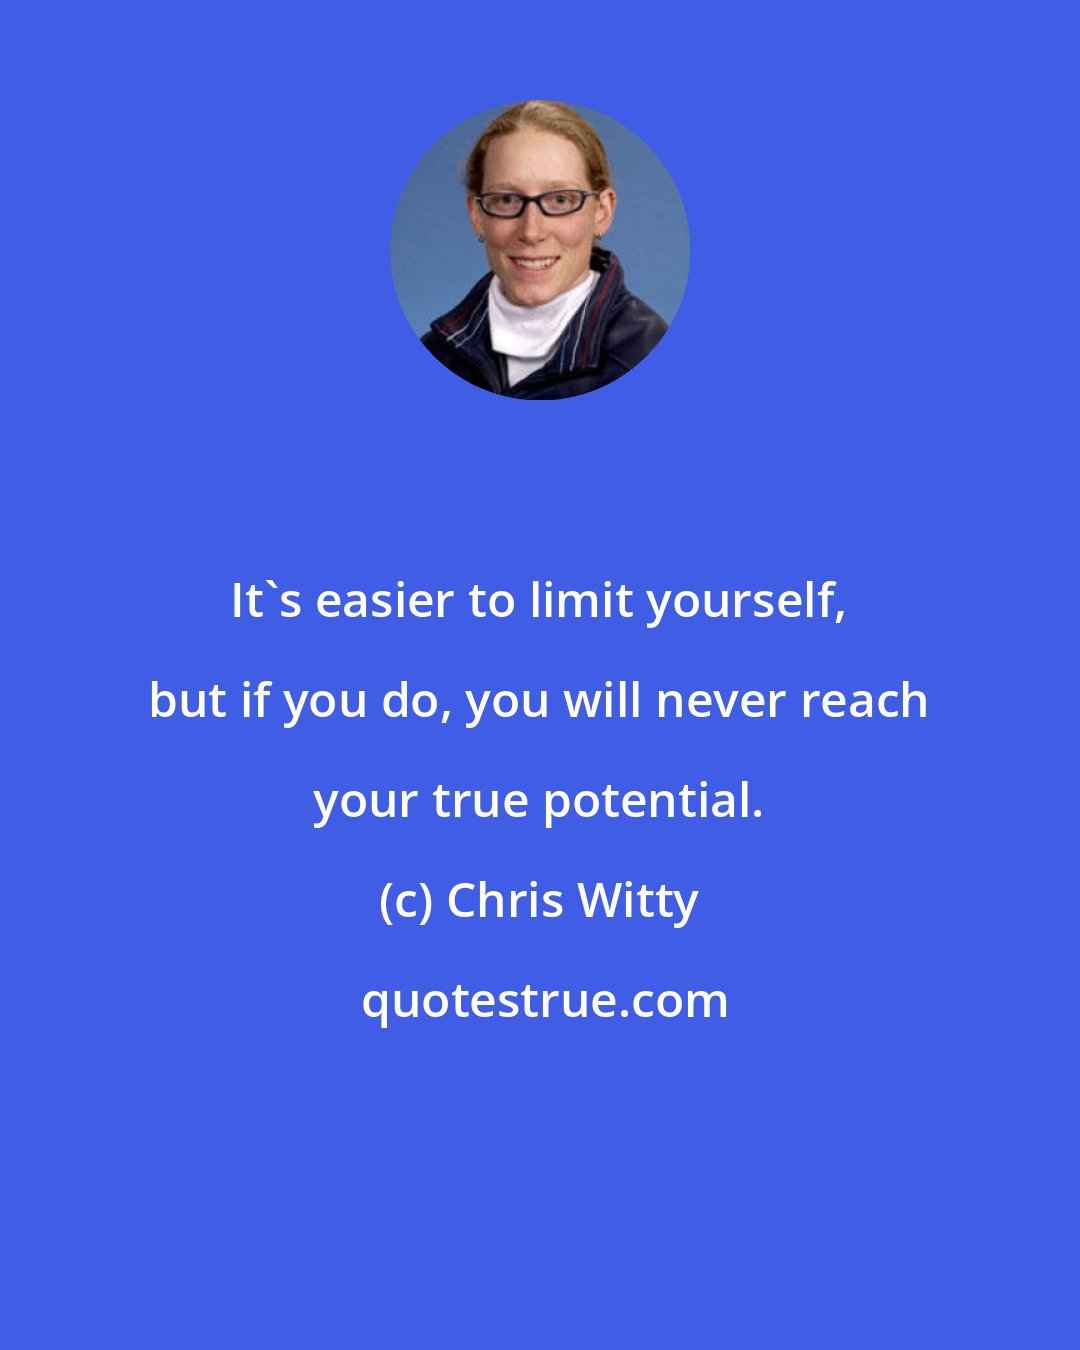 Chris Witty: It's easier to limit yourself, but if you do, you will never reach your true potential.